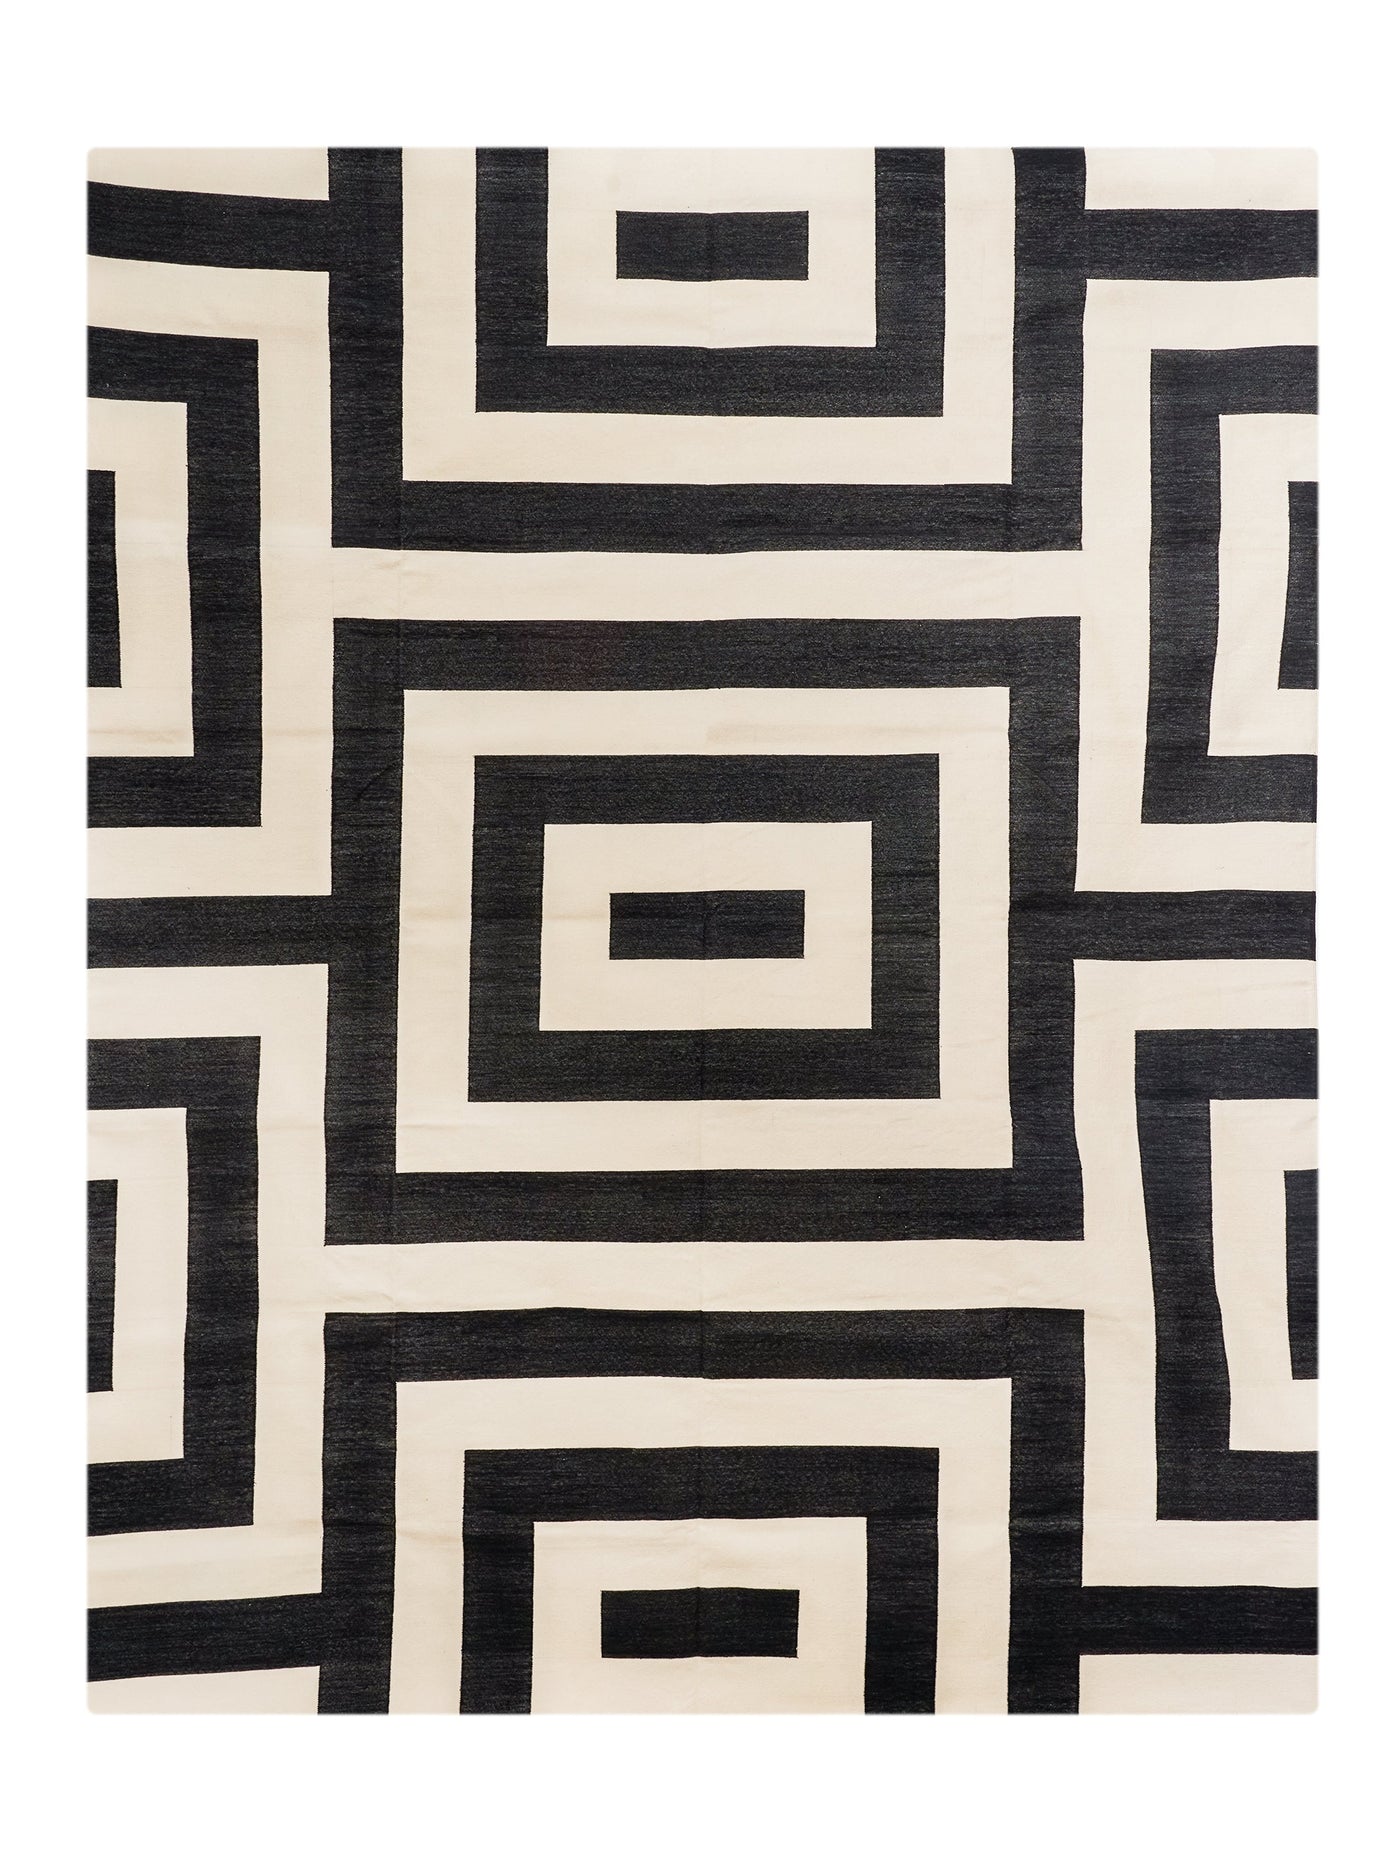 Cotton Dhurrie Bowie Rug 9x12 Feet in Black & White by Permanent Resident